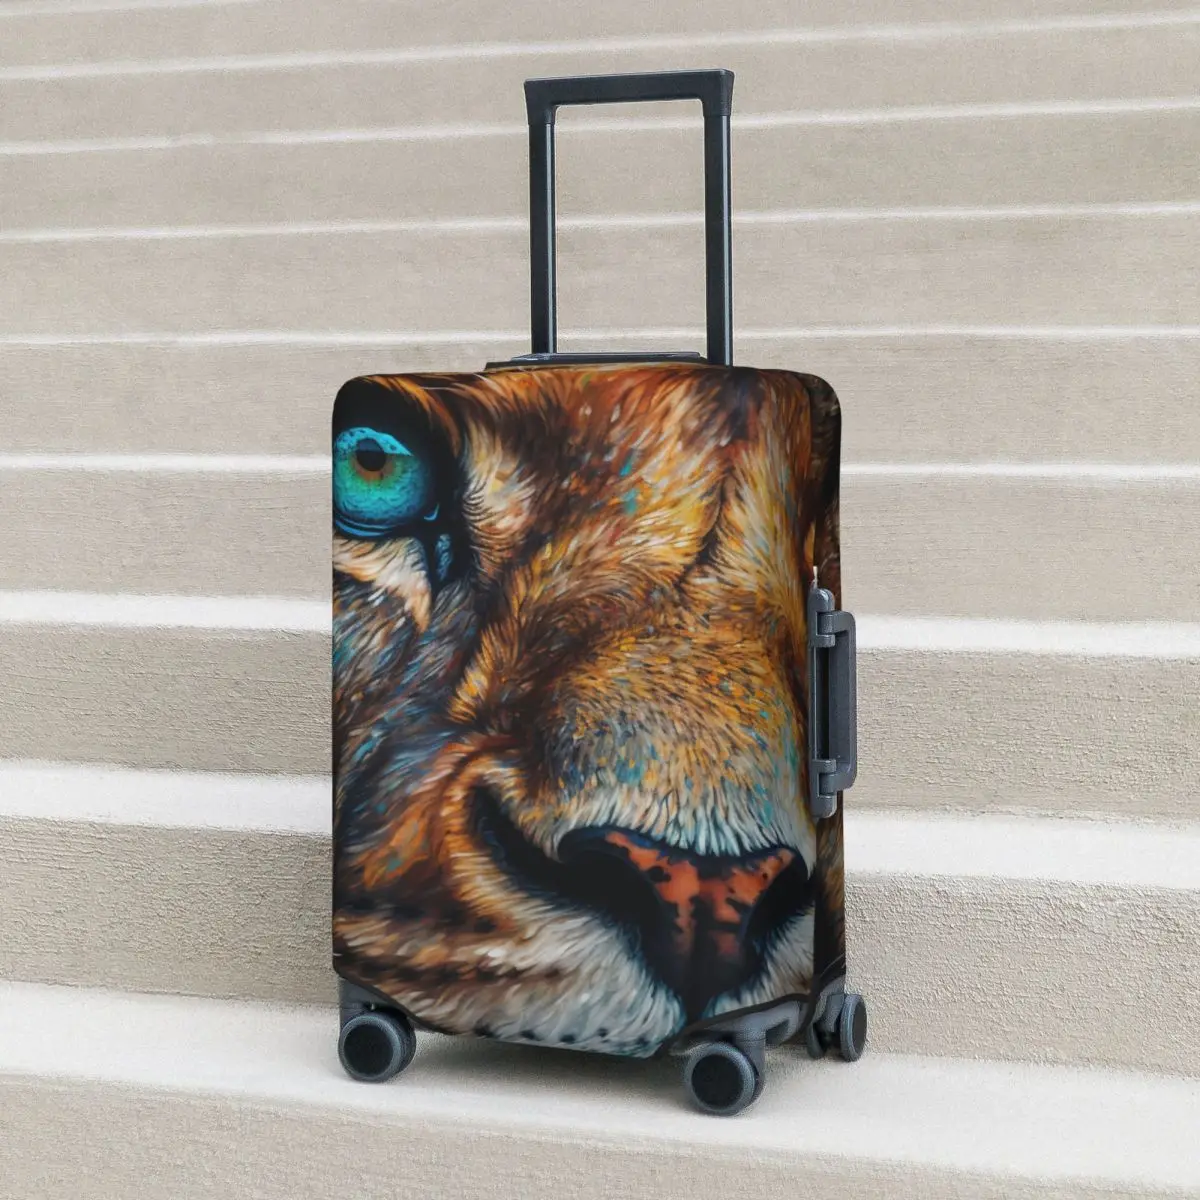 

Lion Suitcase Cover Animal Eyes Business Vacation Fun Luggage Case Protector